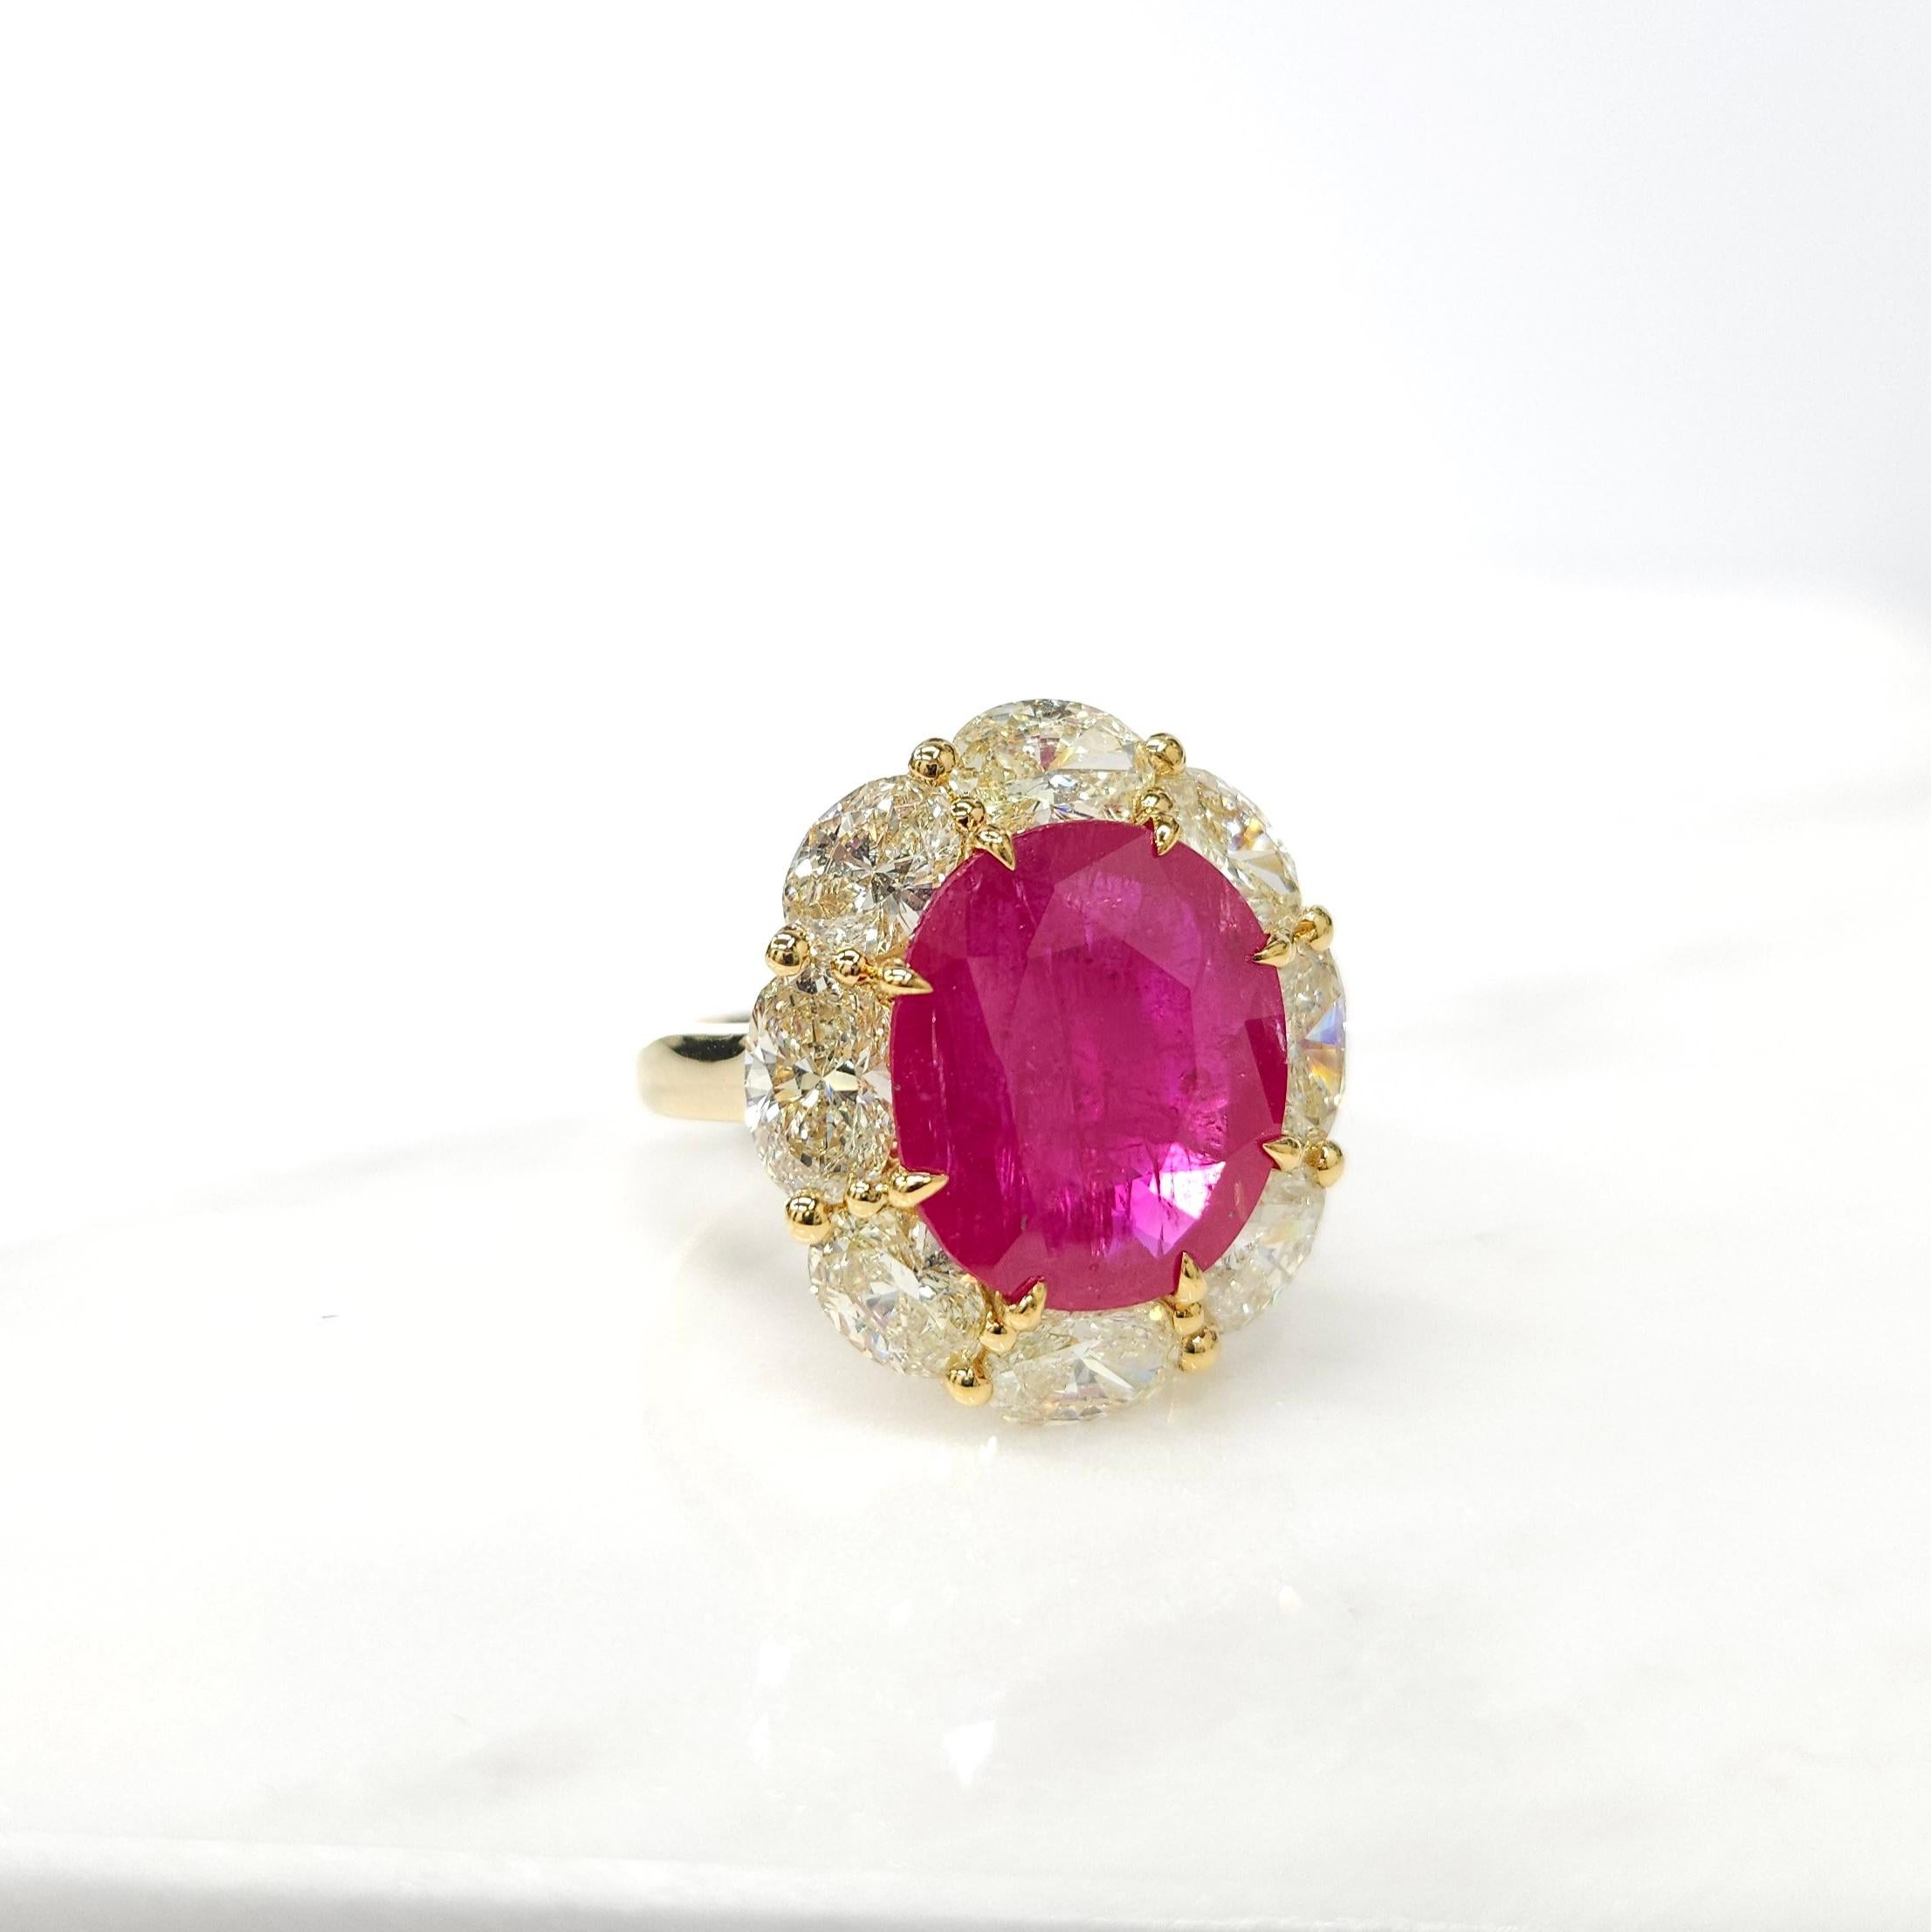 IGI Certified 6.53 Carat Ruby & 3.71 Carat Oval Diamond Ring in 18K Yellow Gold For Sale 7